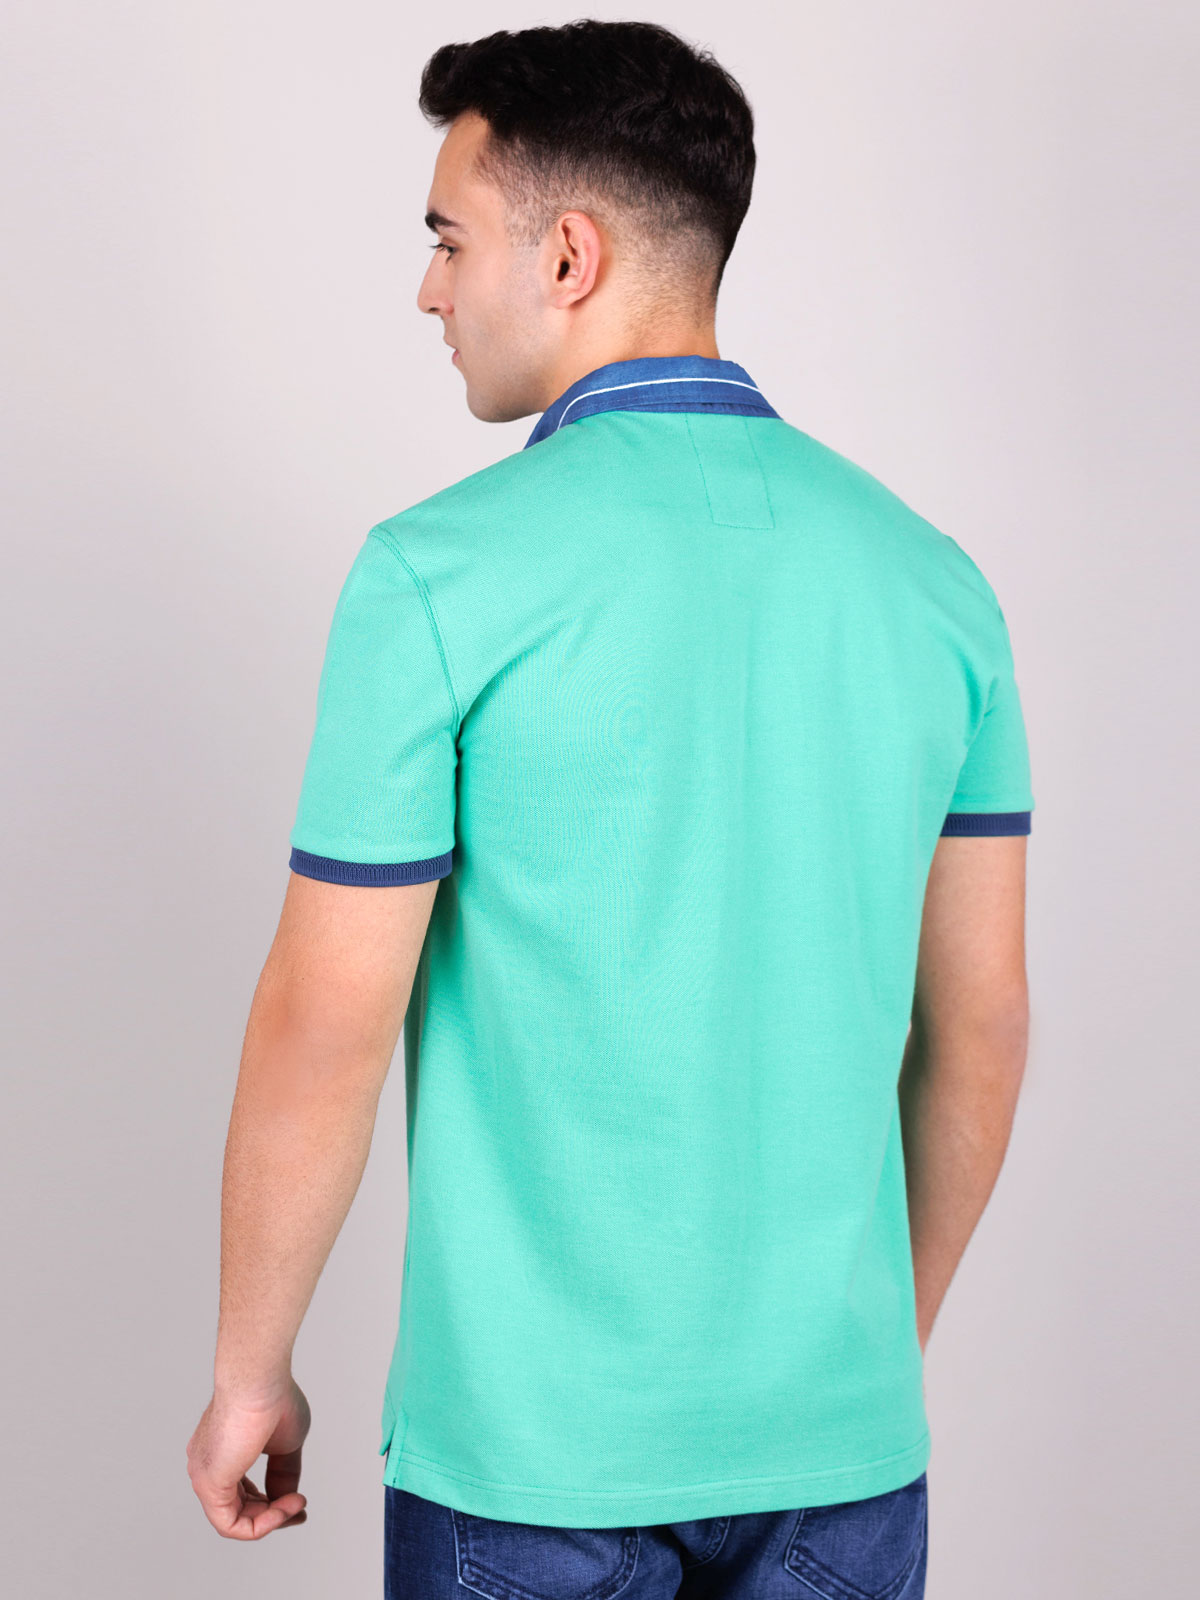 Tshirt in green with a denim collar - 93414 € 30.93 img4